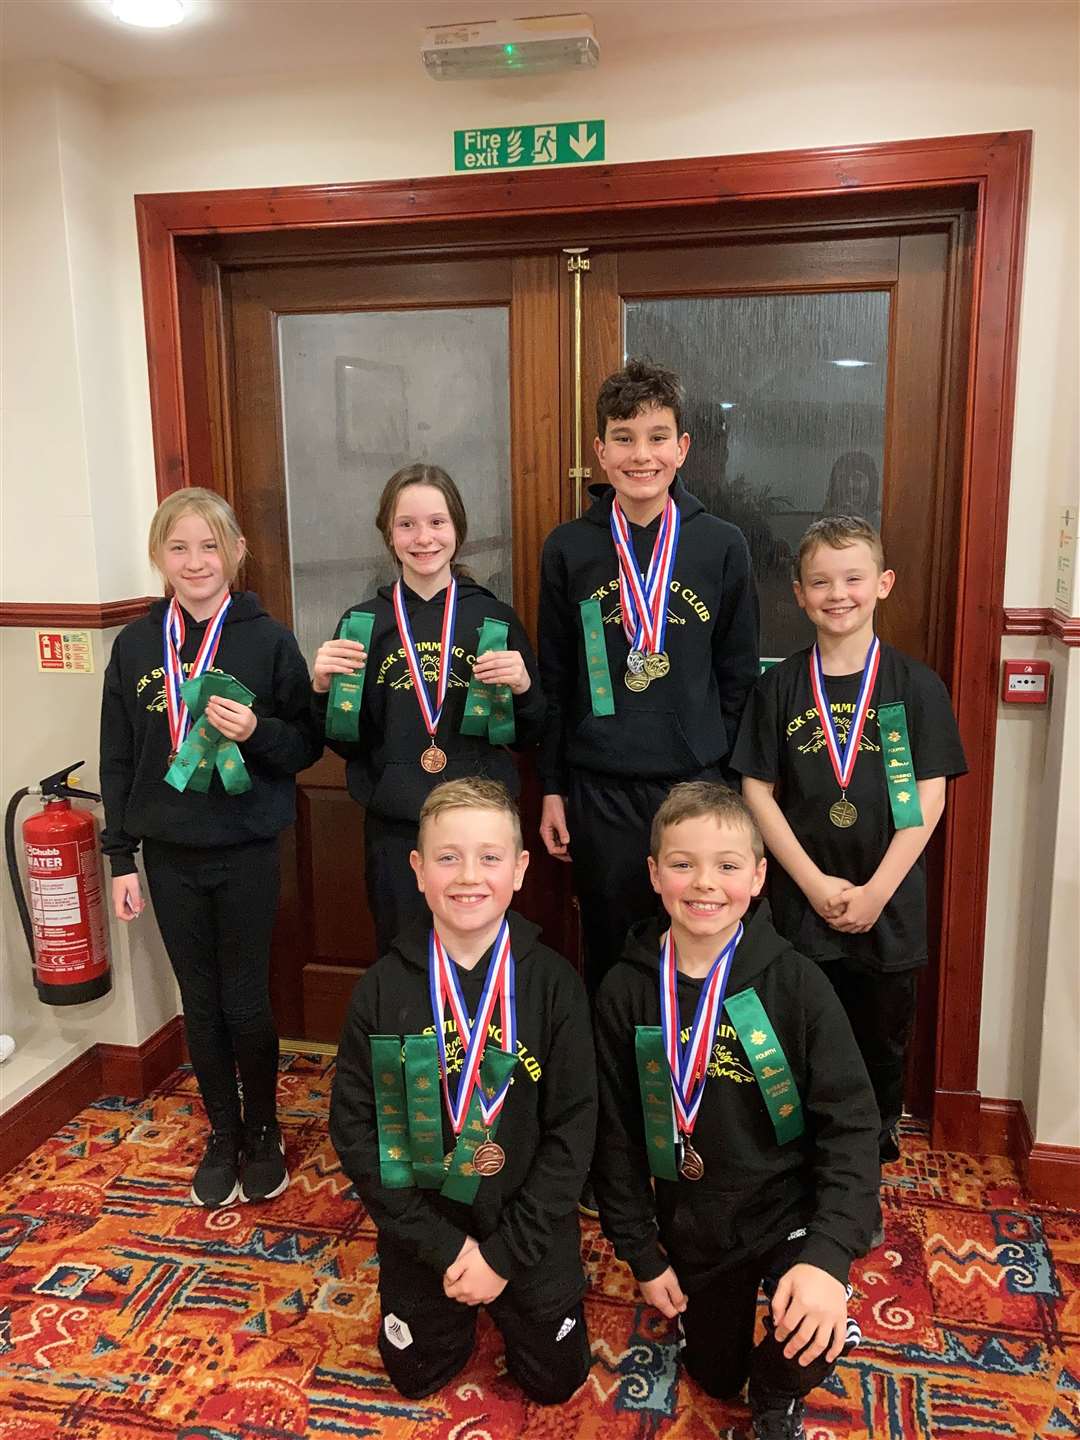 The team from Wick Amateur Swimming Club with their medals.